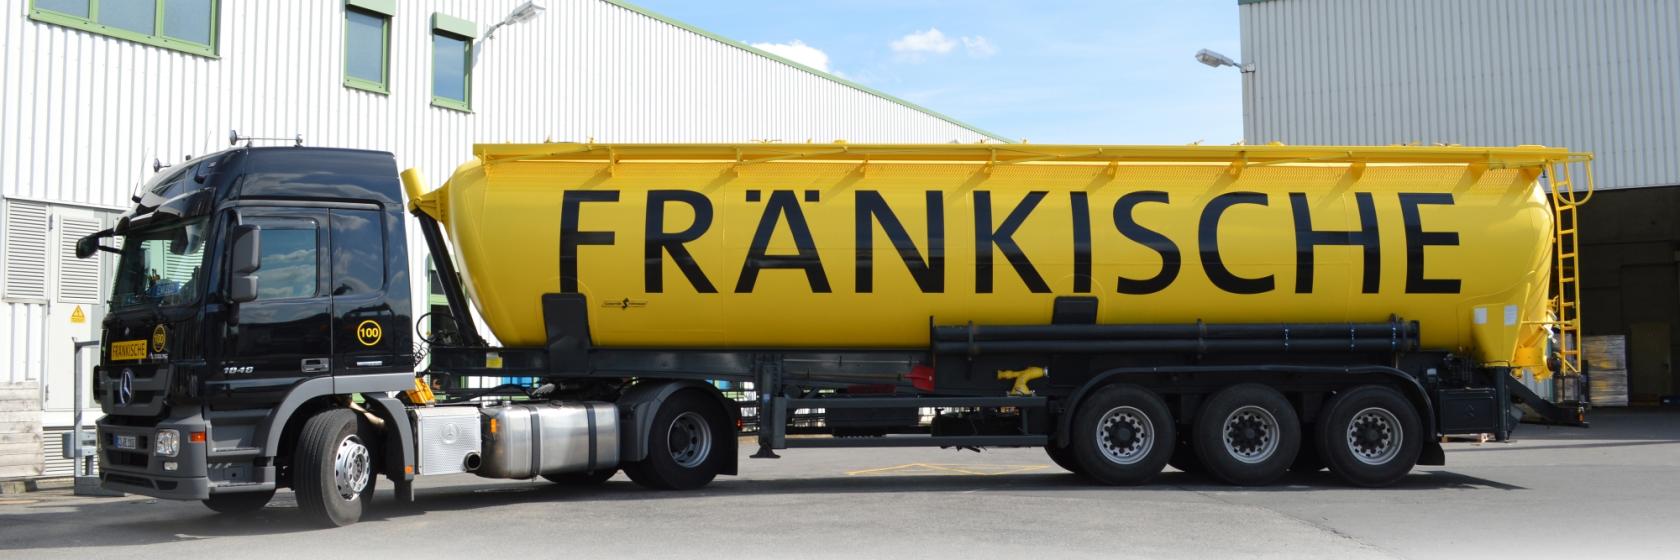 FRÄNKISCHE is an international, growth-oriented family business which offers its strategic partners long-term, dependable and cooperative collaboration.